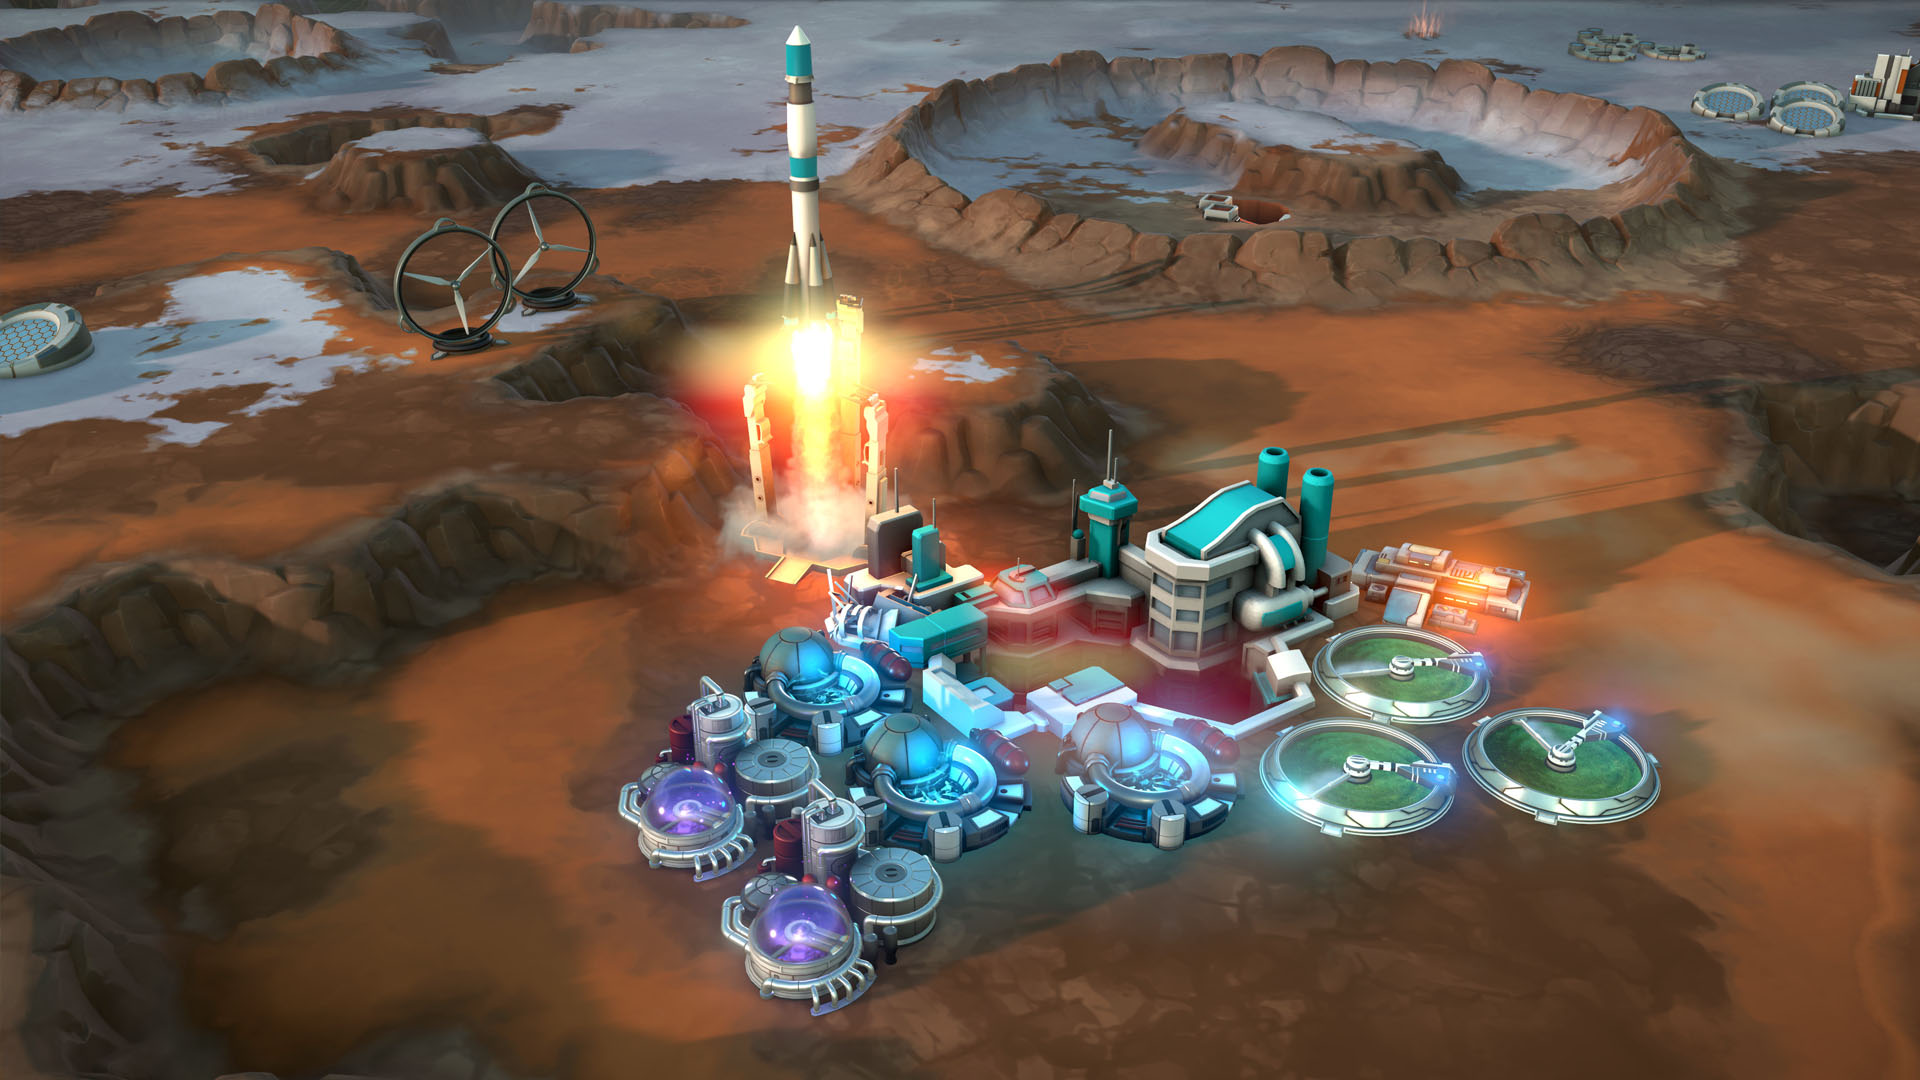 Best strategy games: Offworld Trading Company. Image shows a missile launching from a base on an alien planet.